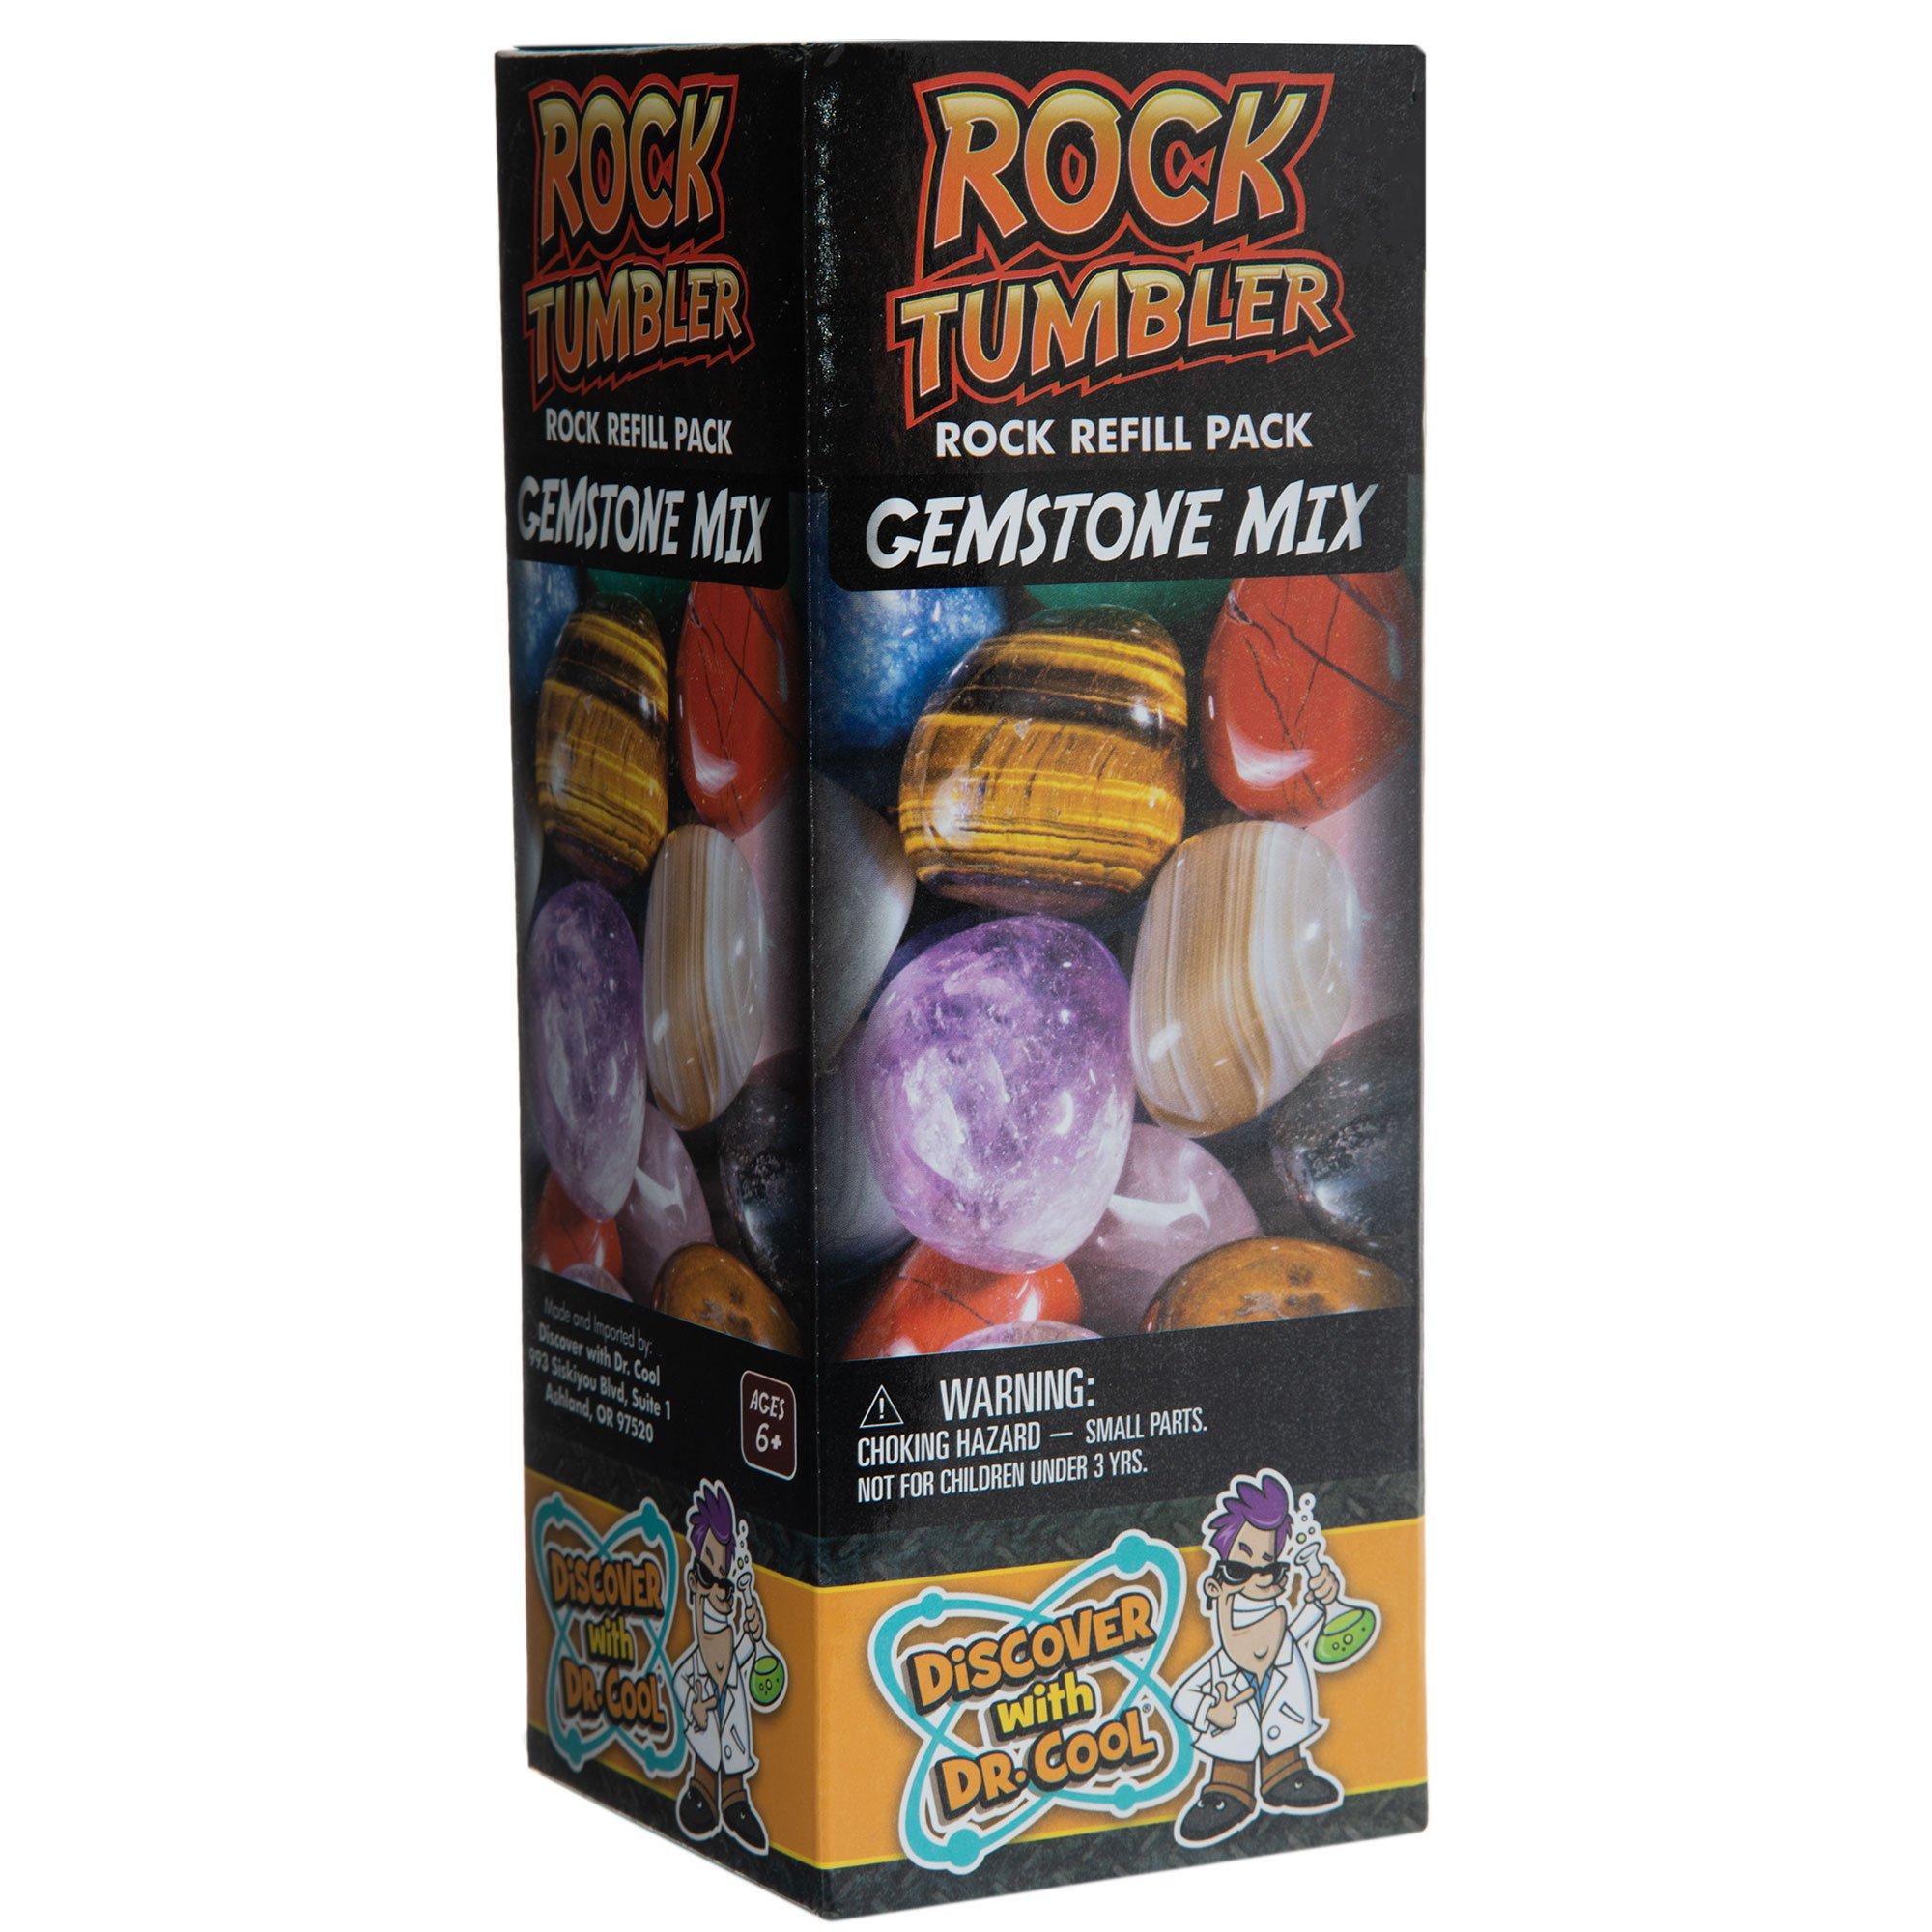 NATIONAL GEOGRAPHIC Rock Tumbler Grit and Polish Refill Kit - Tumbling Grit  Media, Polish Up to 20 lbs. of Rocks, Works with any Rock Polisher 